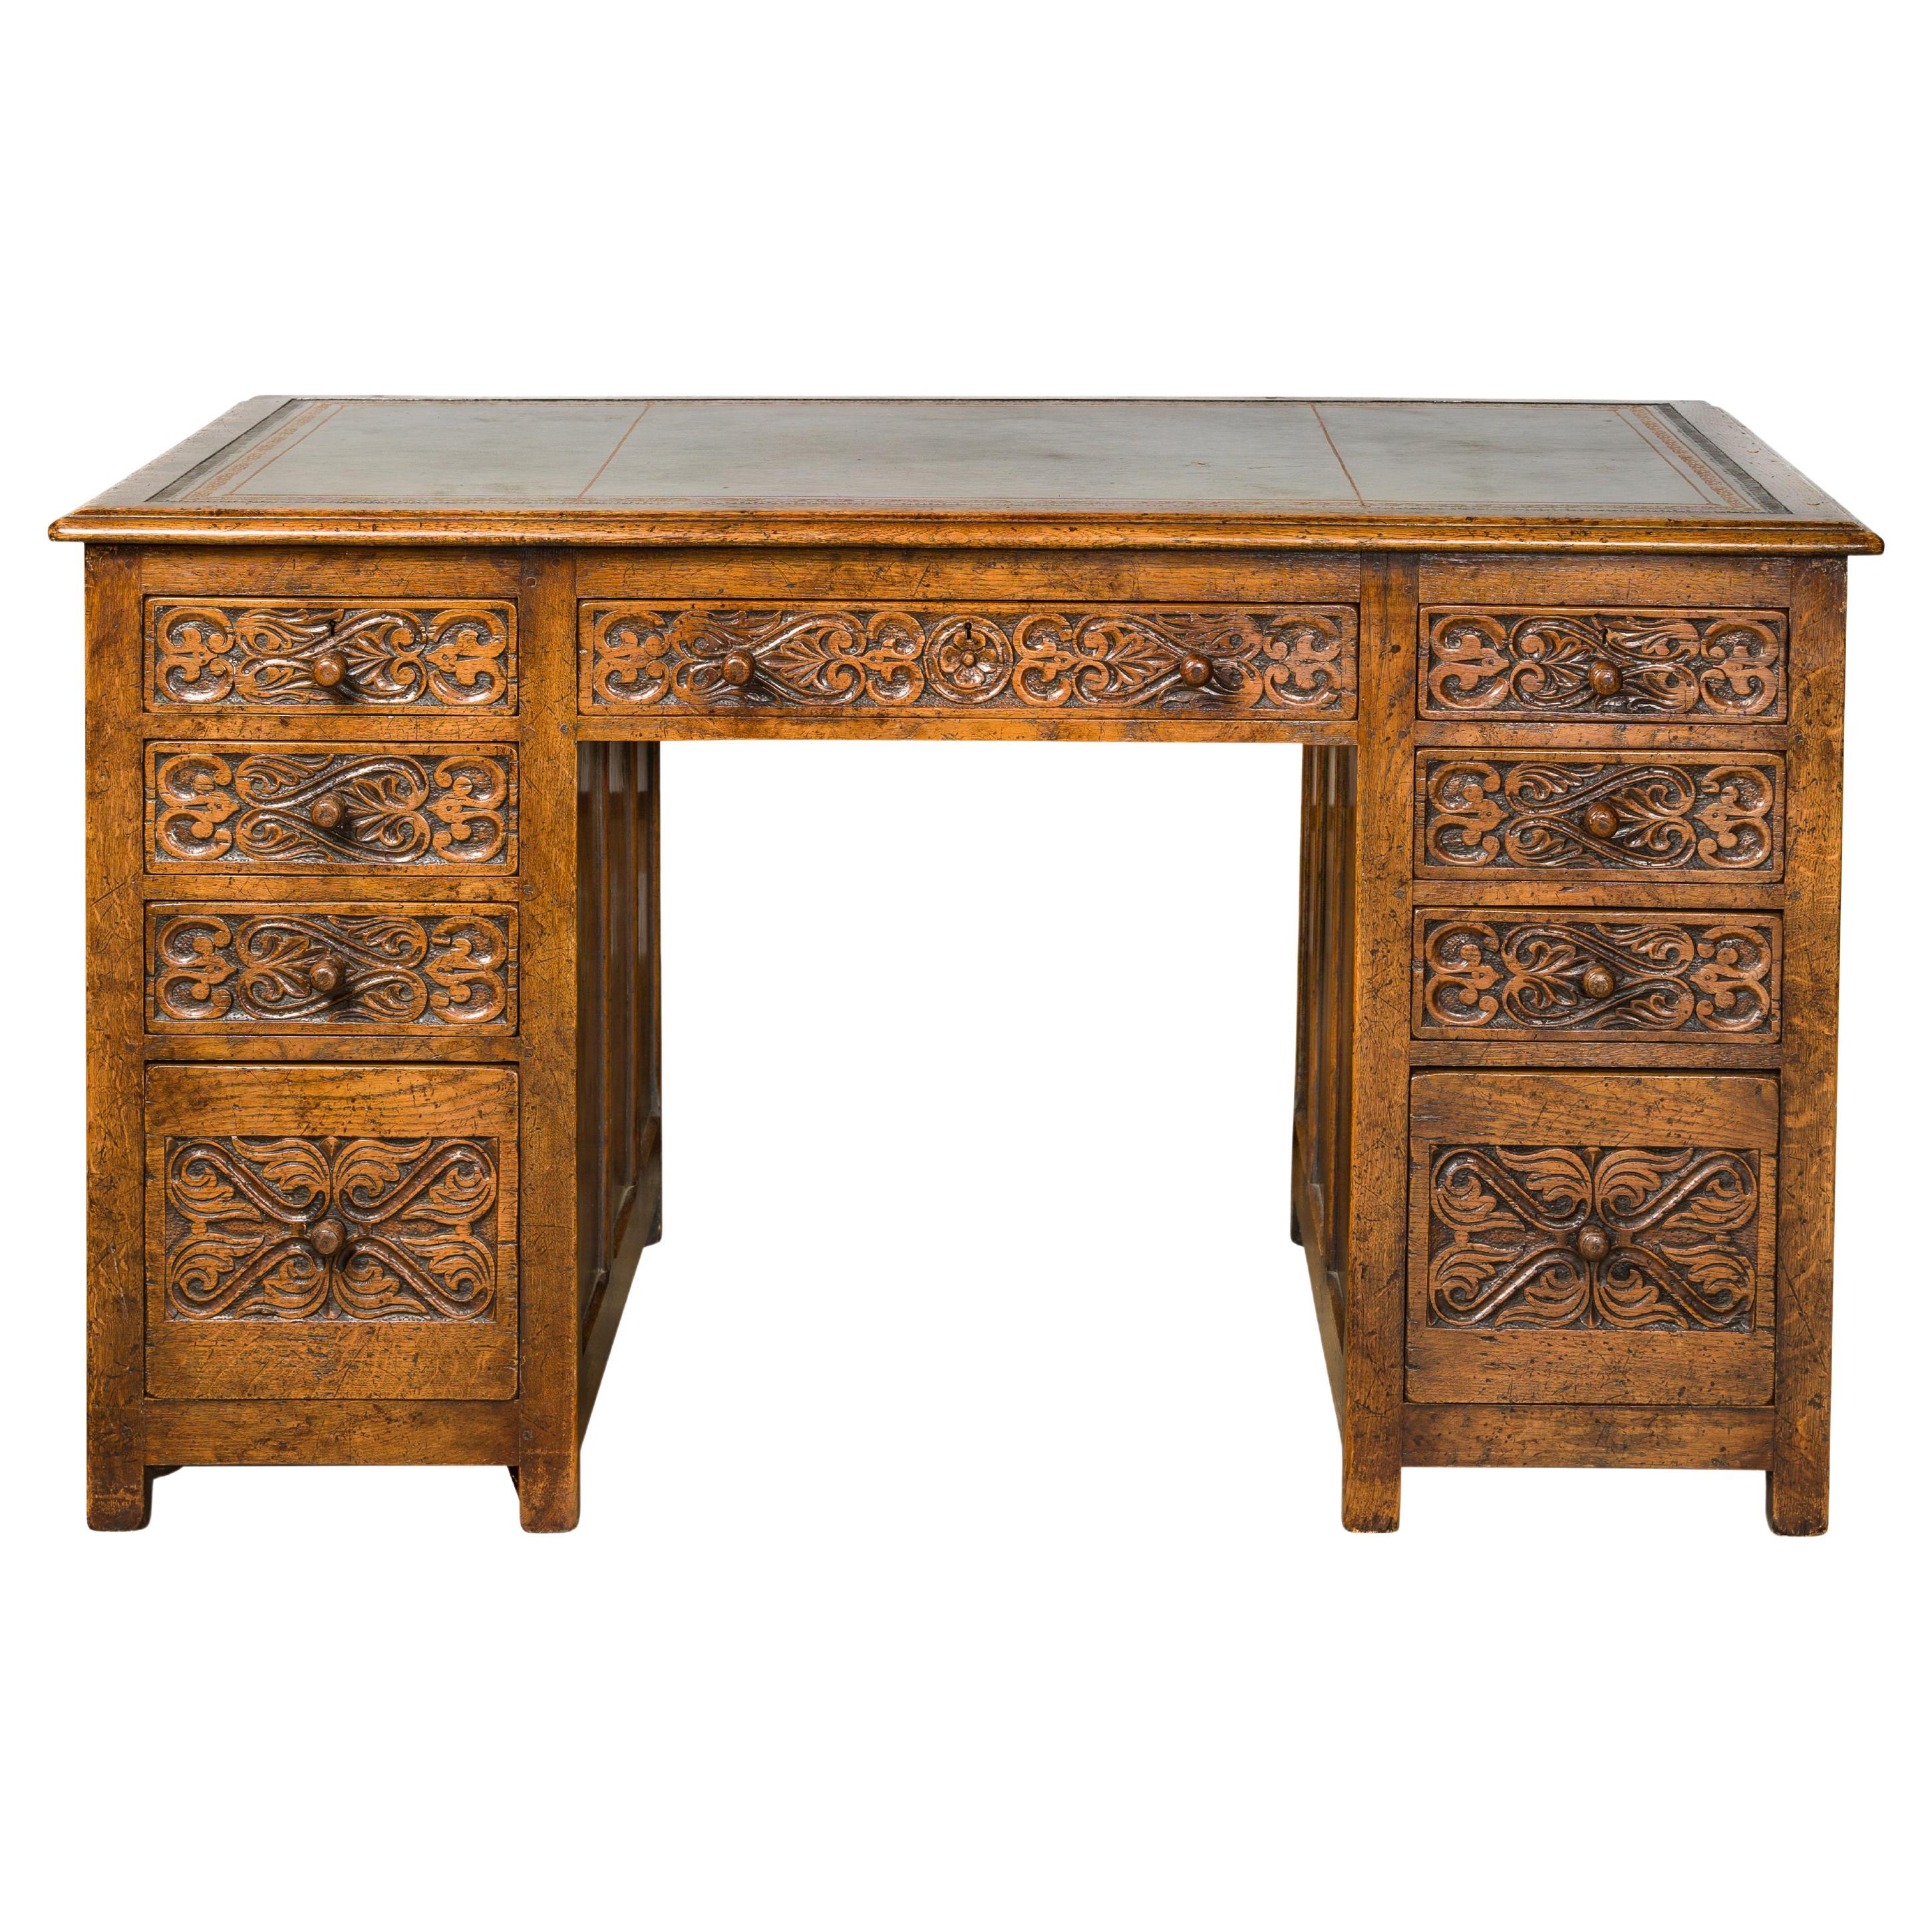 English 19th Century Oak Kneehole Desk with Nine Drawers and Carved Foliage